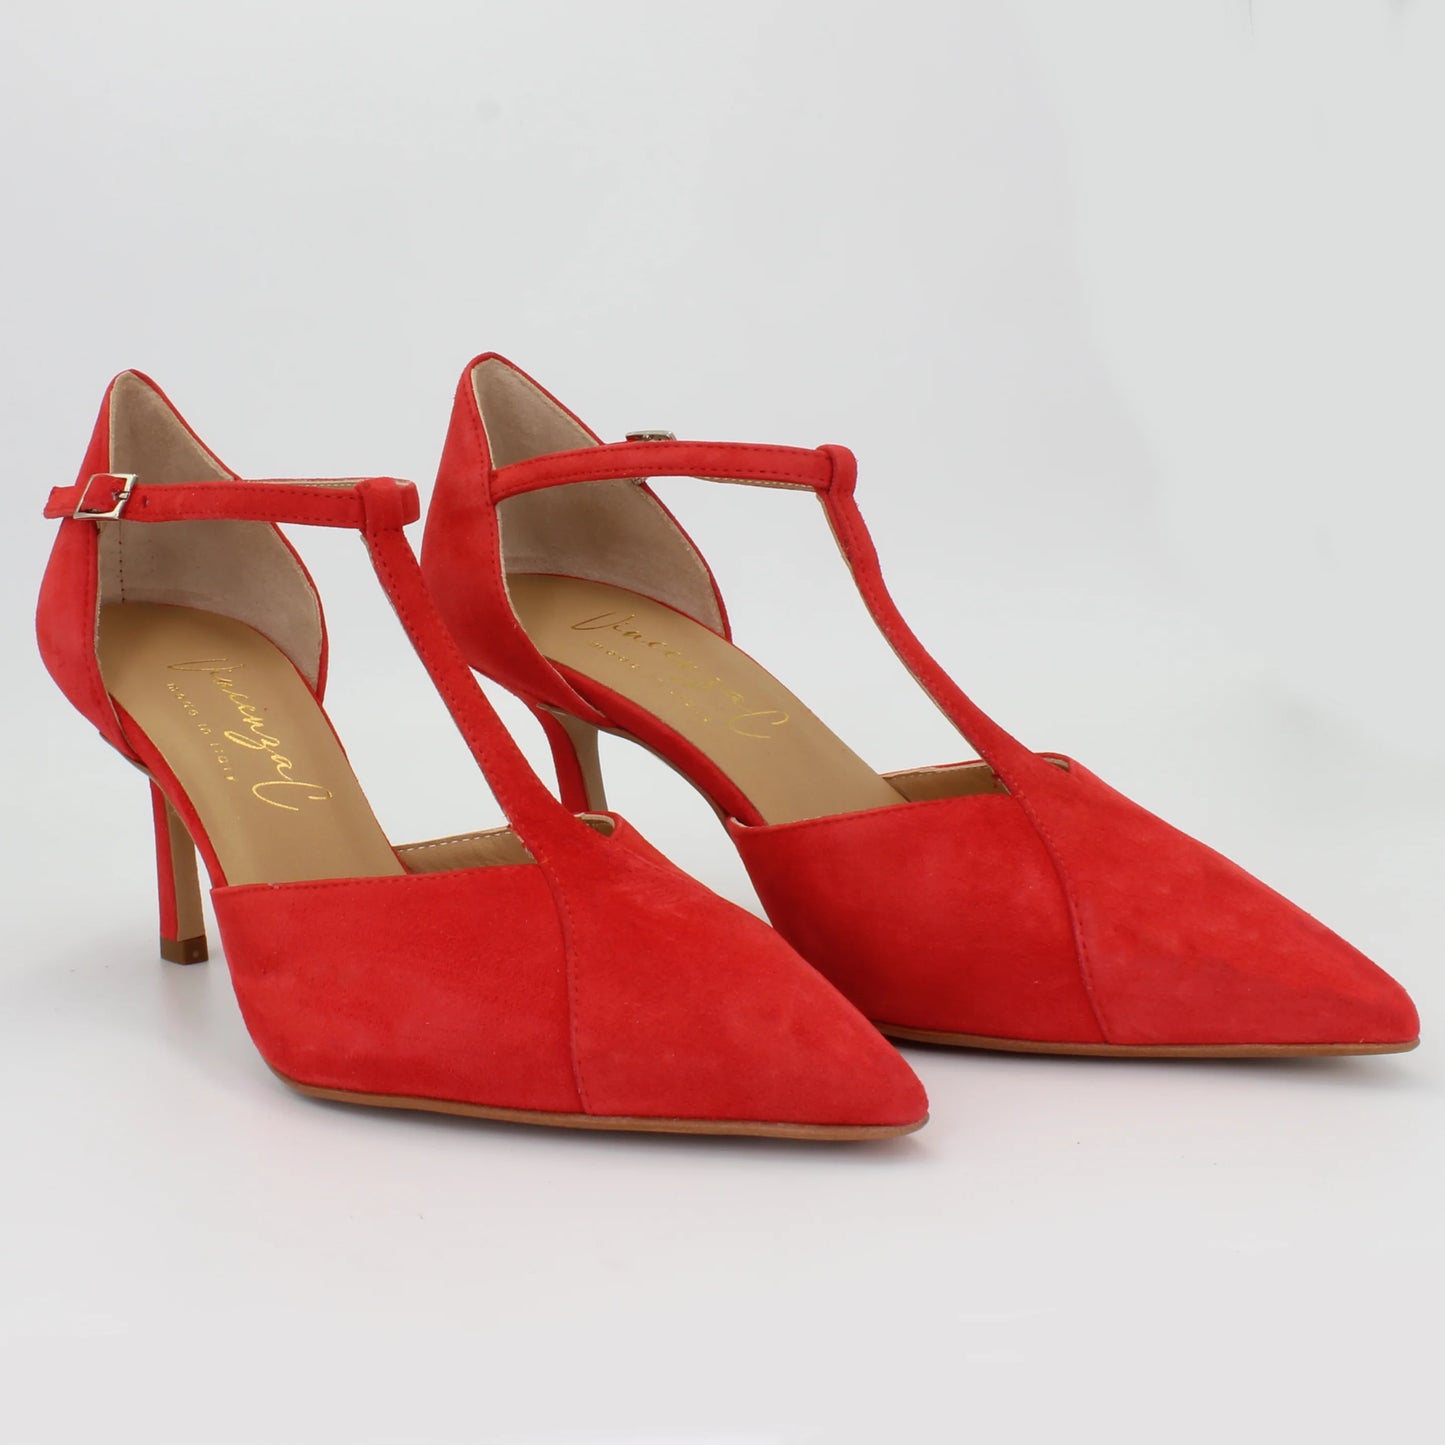 Shop Handmade Italian Leather Suede Mary Jane Rossetto (V17) or browse our range of hand-made Italian shoes for women in leather or suede in-store at Aliverti Cape Town, or shop online. We deliver in South Africa & offer multiple payment plans as well as accept multiple safe & secure payment methods.